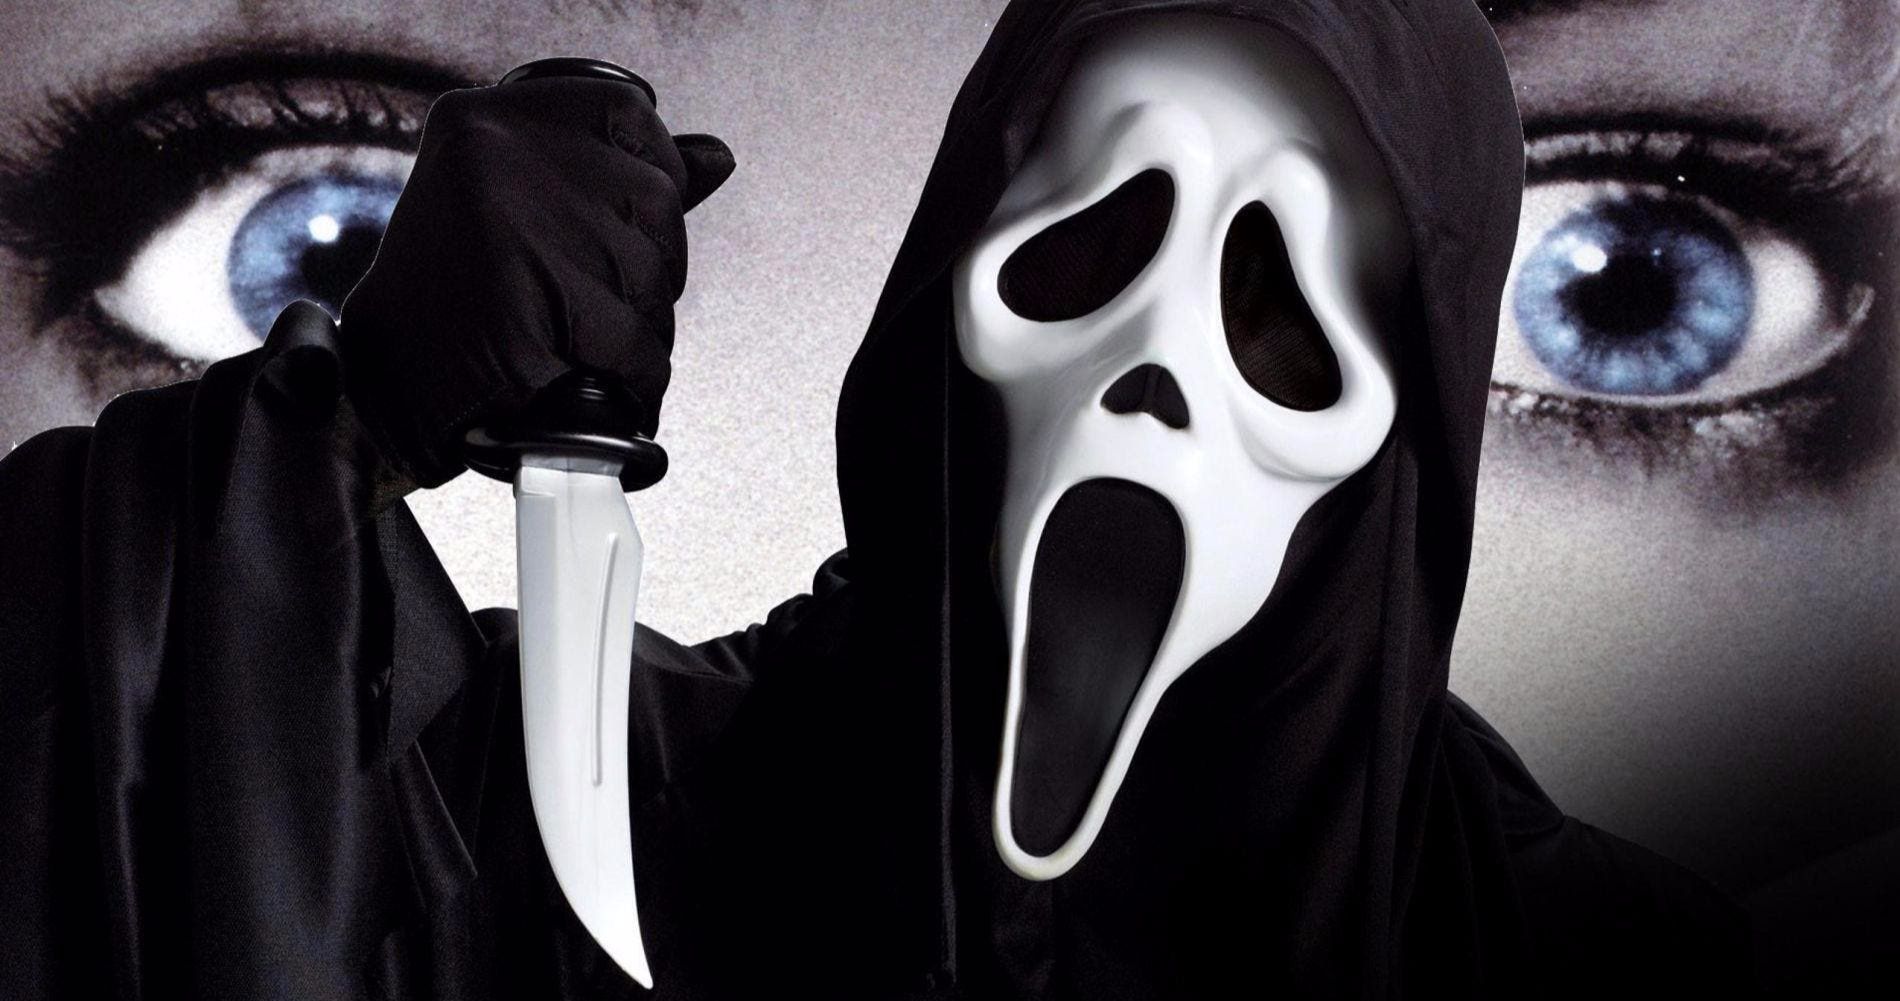 Scream 5 Is Coming in 2021 from Paramount Pictures